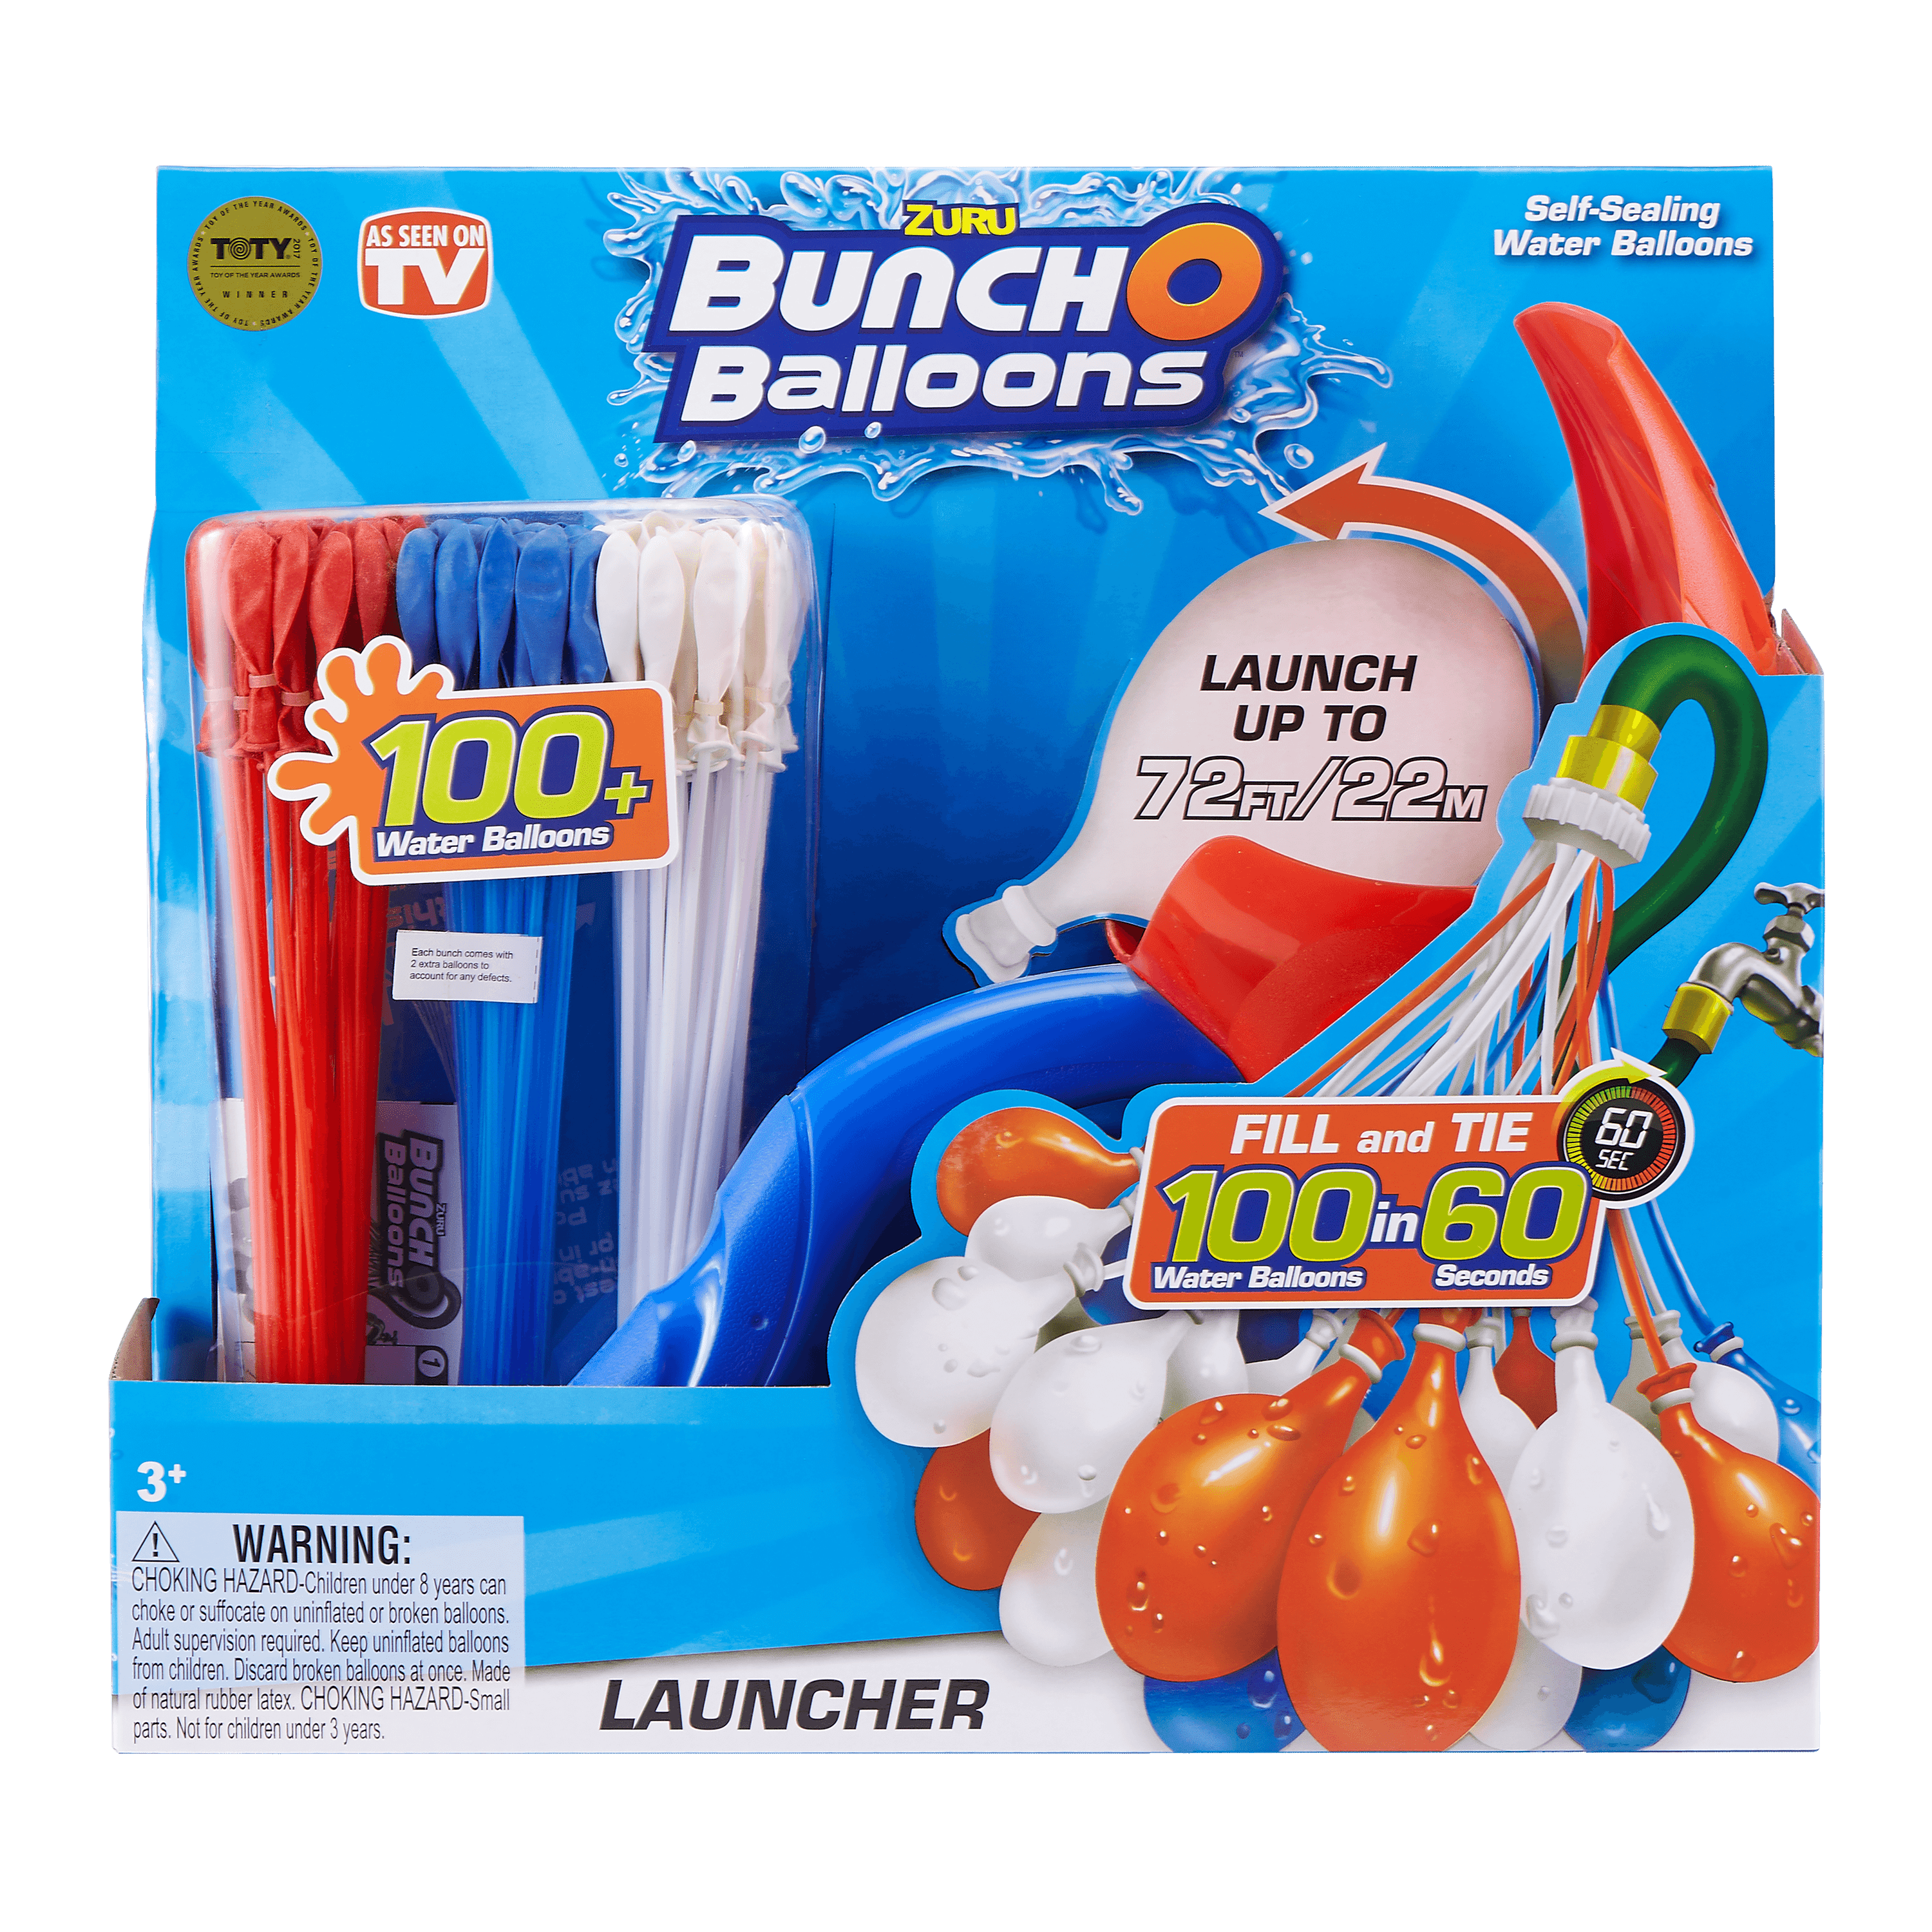 Bunch o Balloons 100 Water Balloons with Balloon Launcher Zuru Red White & Blue 